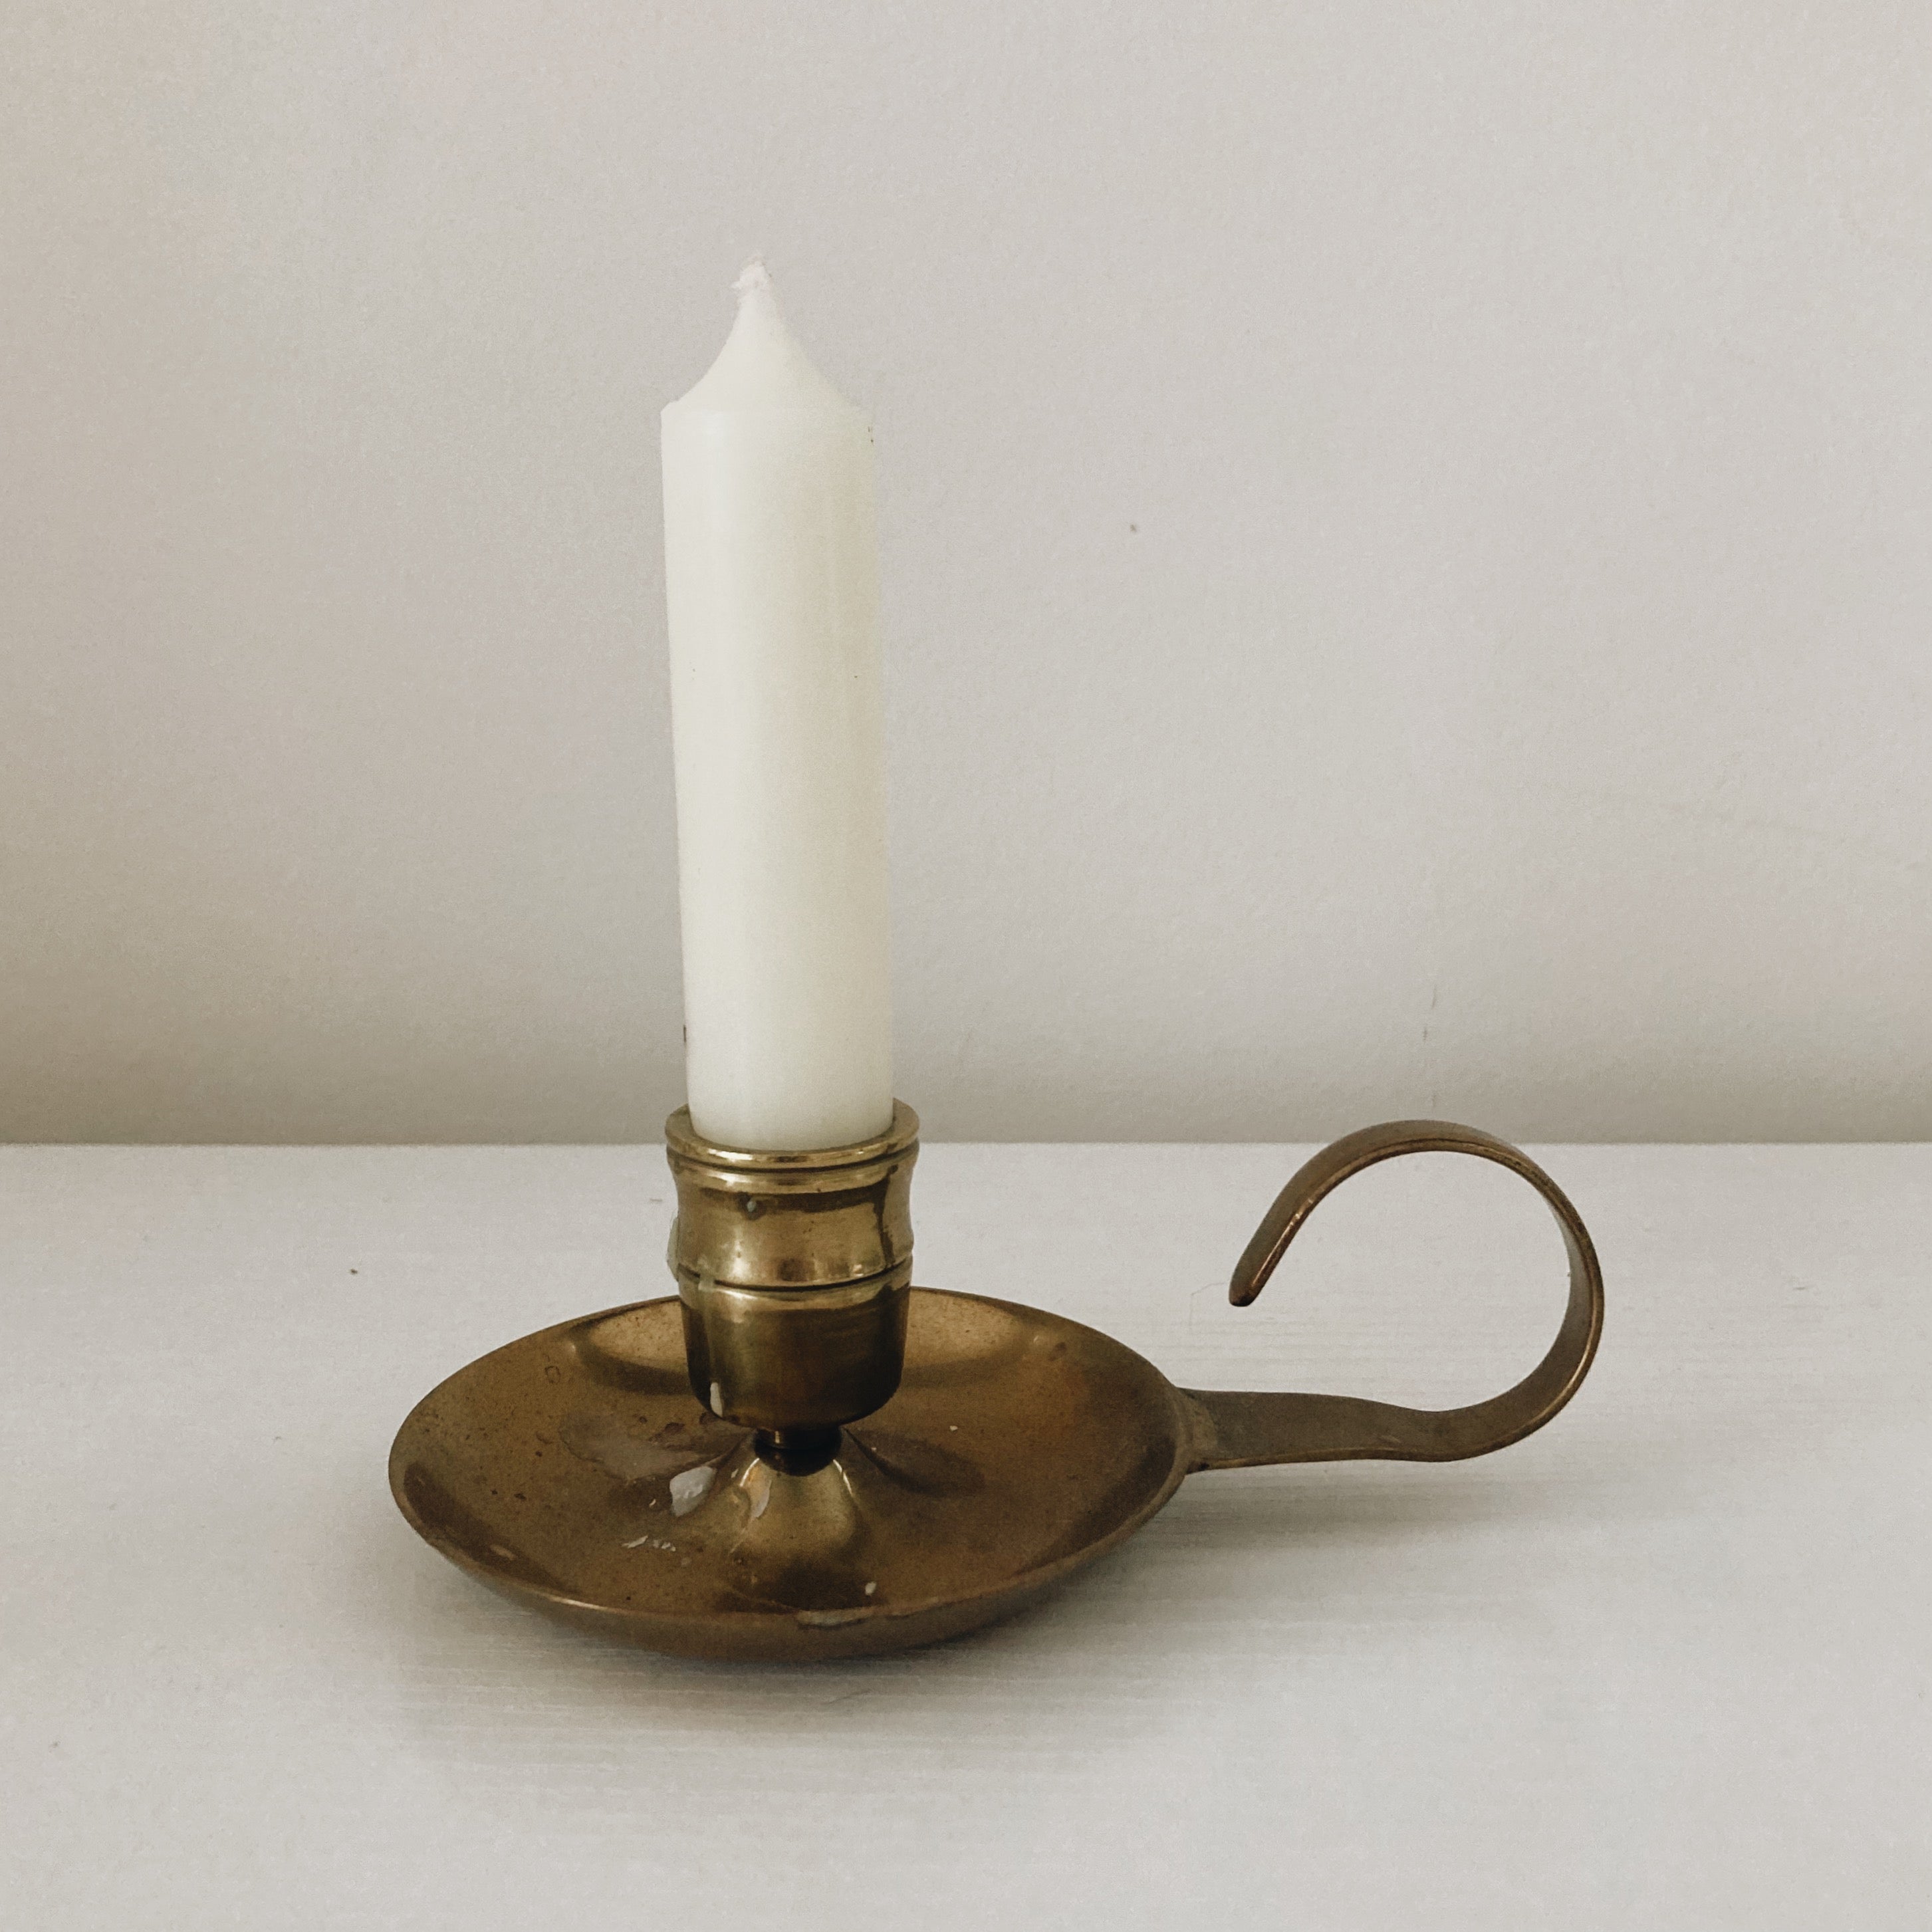 Nordic Vintage Brass Candlesticks - Classic Ambiance - Time-Honored Decor  from Apollo Box